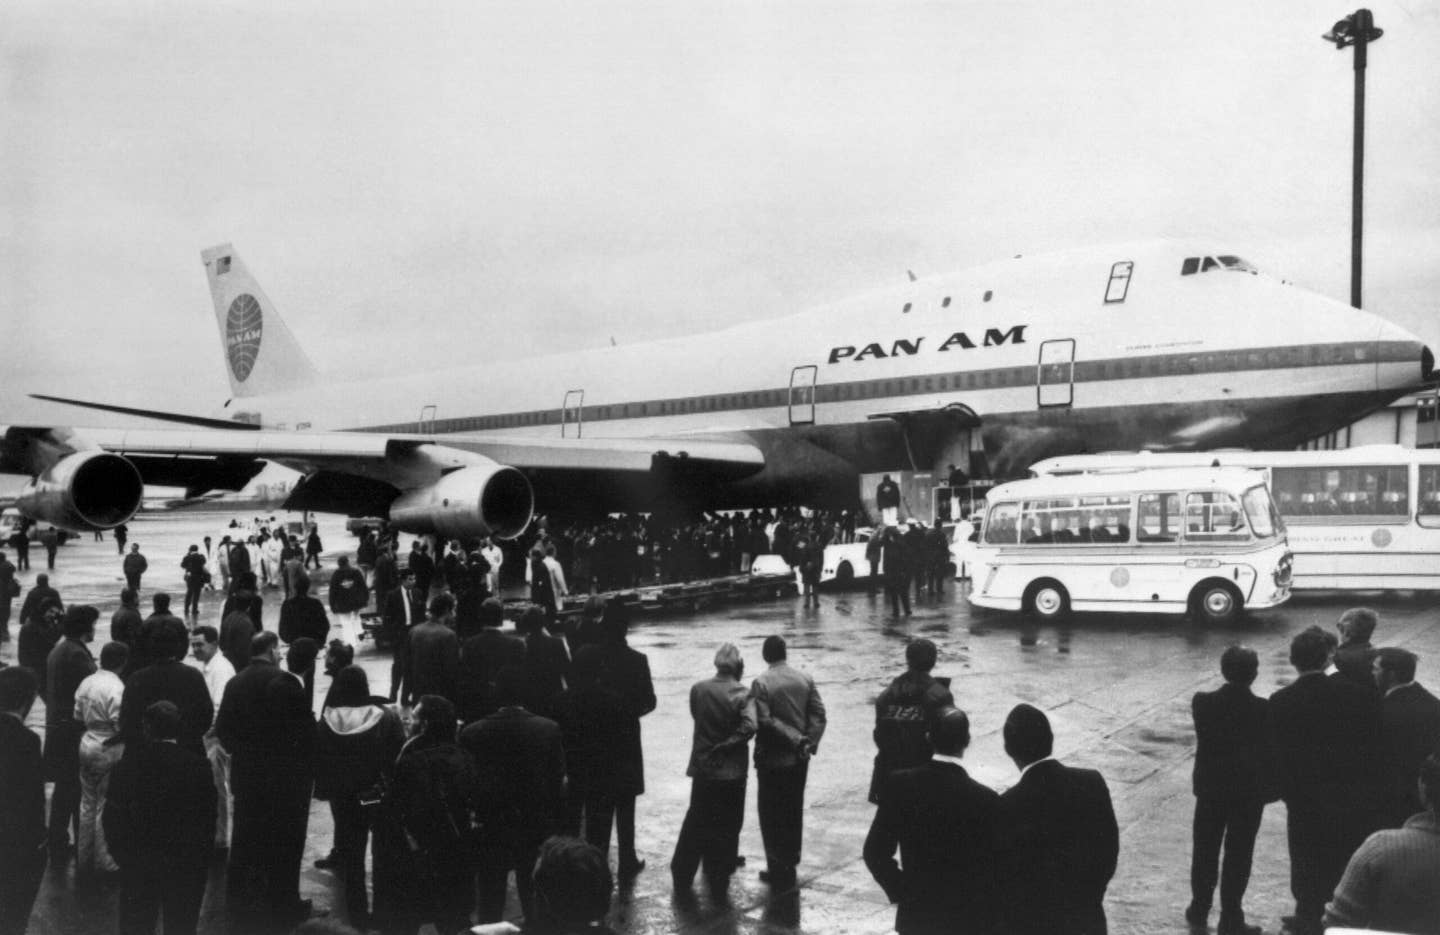 A Pan Am Boeing 747 is seen just after landing at London's Heathrow airport, on January 22, 1970 after its first commercial flight. On September 30, 1968, the first 747 was rolled out of the Everett assembly building before the world's press and representatives of the 26 airlines that had ordered the plane, and first flight took place on February 09, 1969. The Boeing 747, called also "Jumbo Jet", entered service on January 21, 1970, on Pan Am's New YorkLondon route. (Photo by - / AFP)        (Photo credit should read -/AFP via Getty Images)